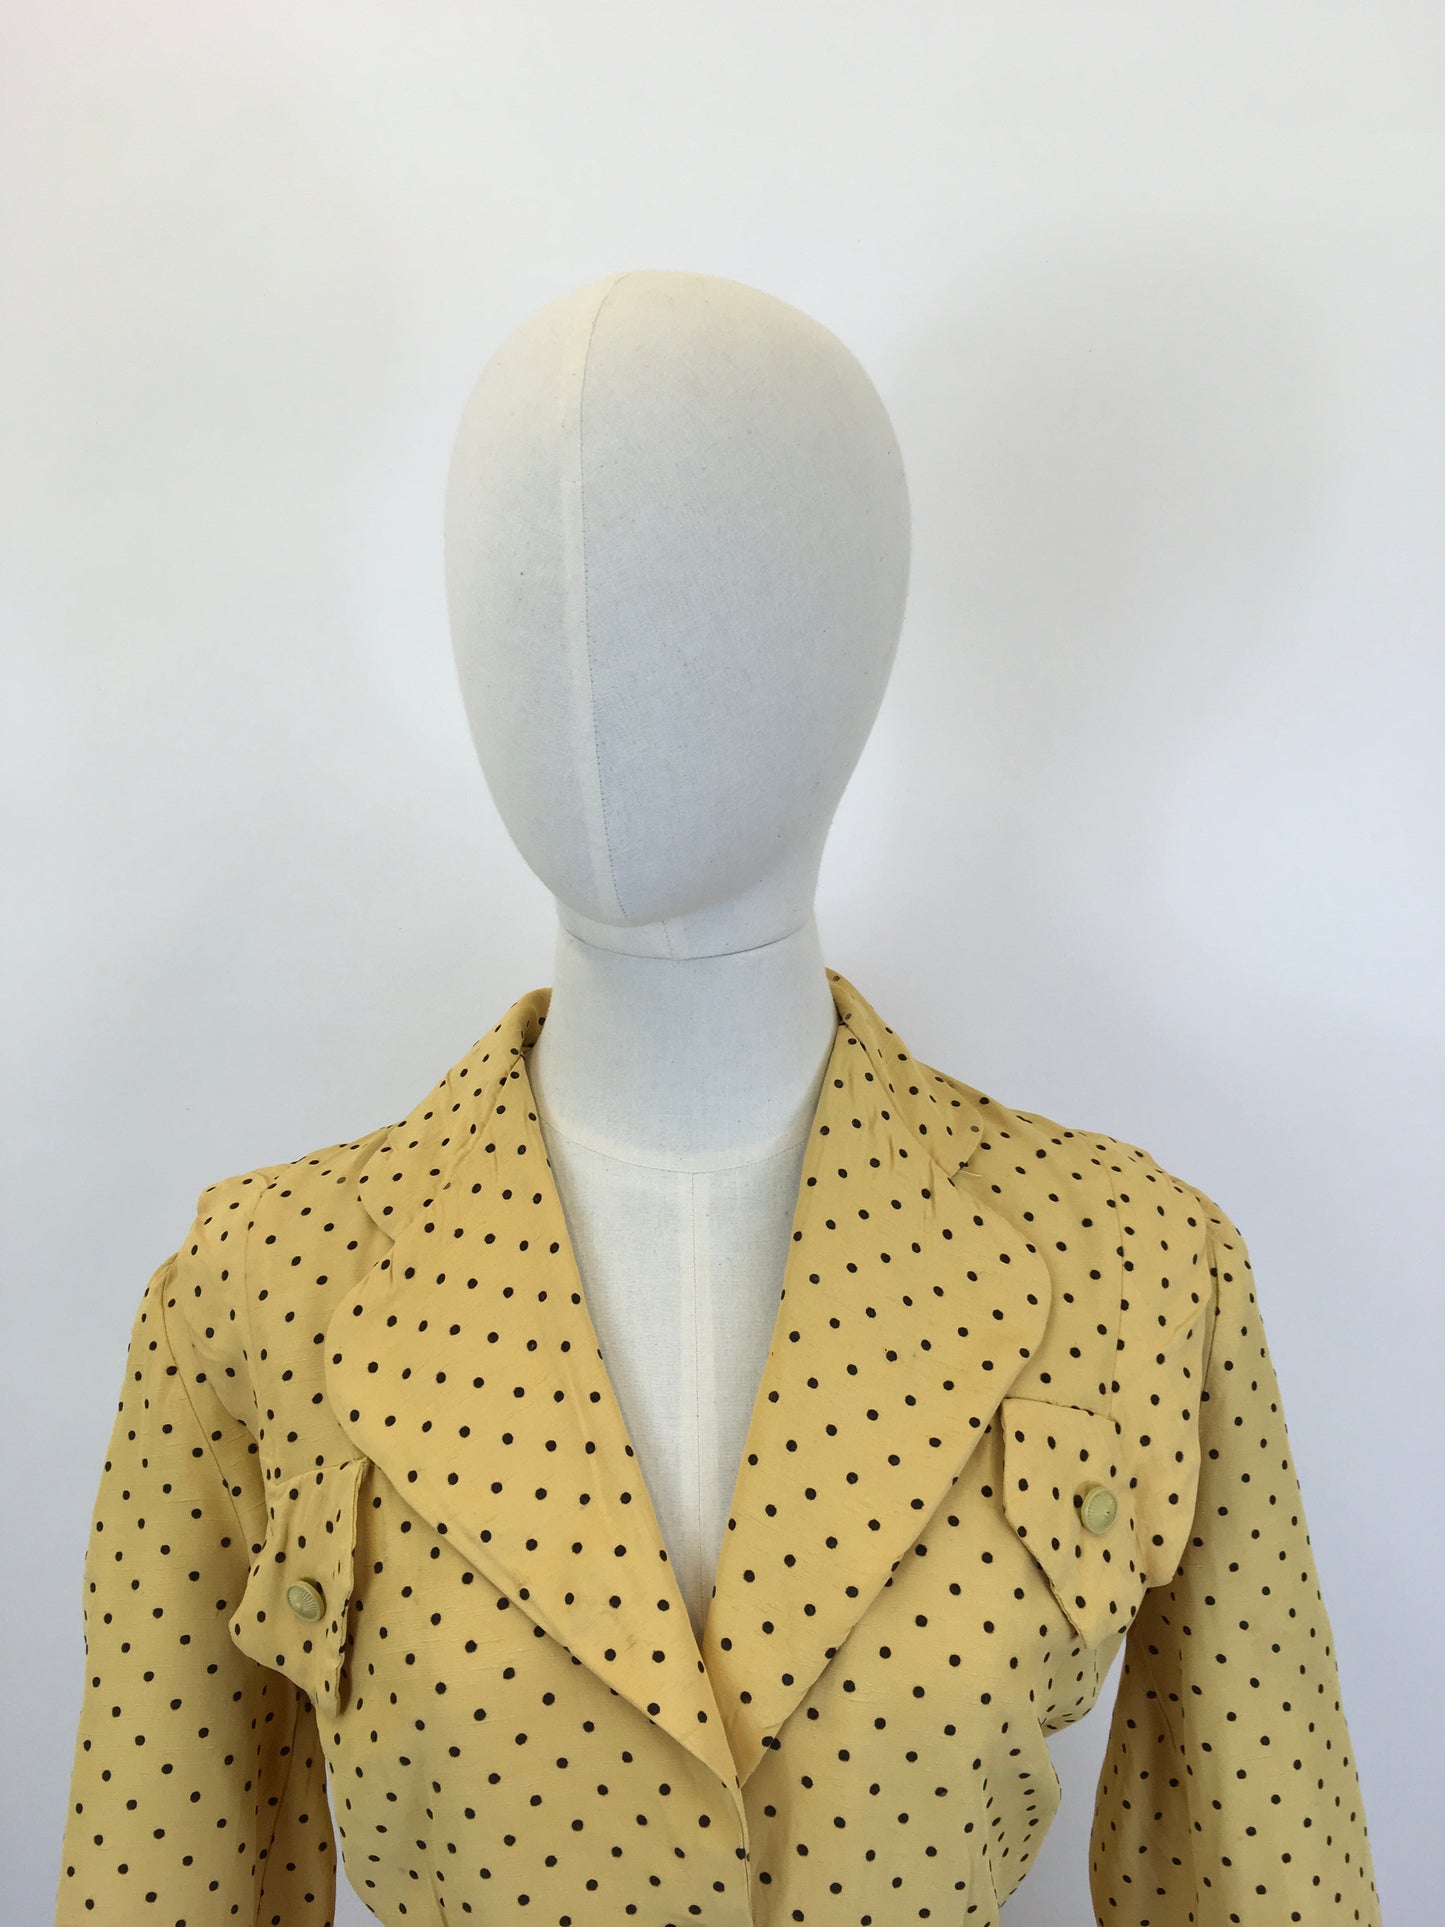 Original 1940's Sublime 2pc Summer Suit by ' New York Creations' - In A Primrose Yellow & Warm Brown Polka Dot